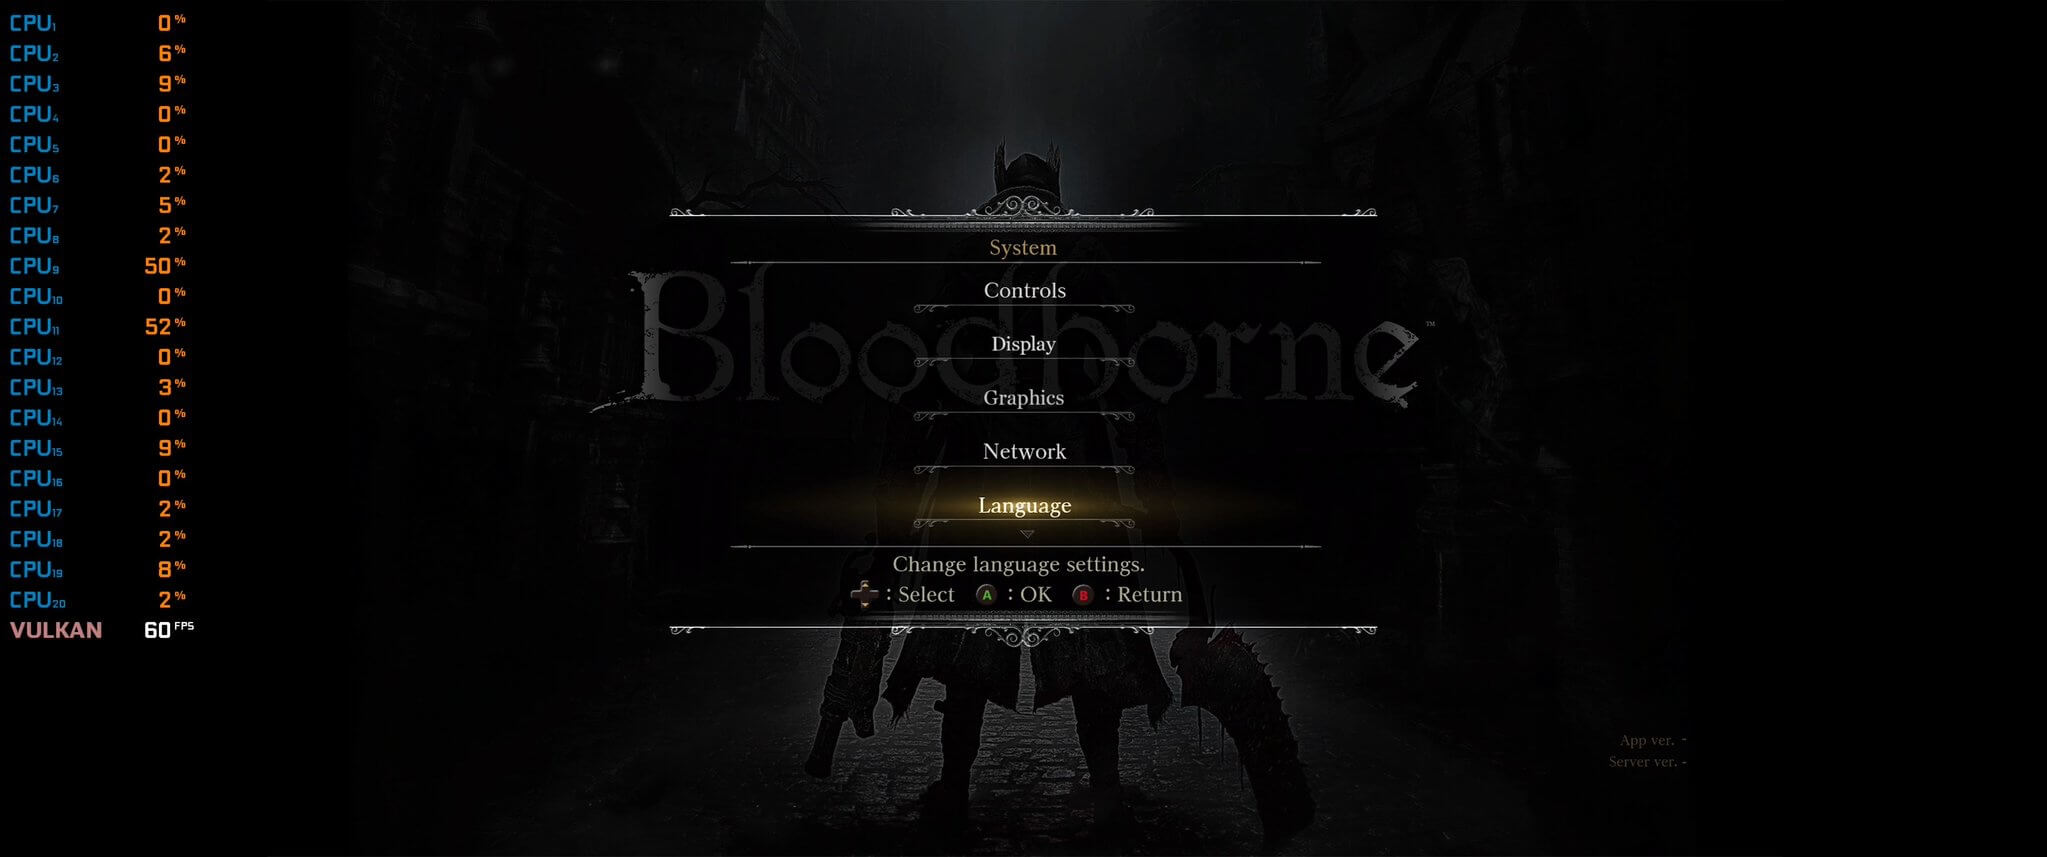 bloodborne for pc free download